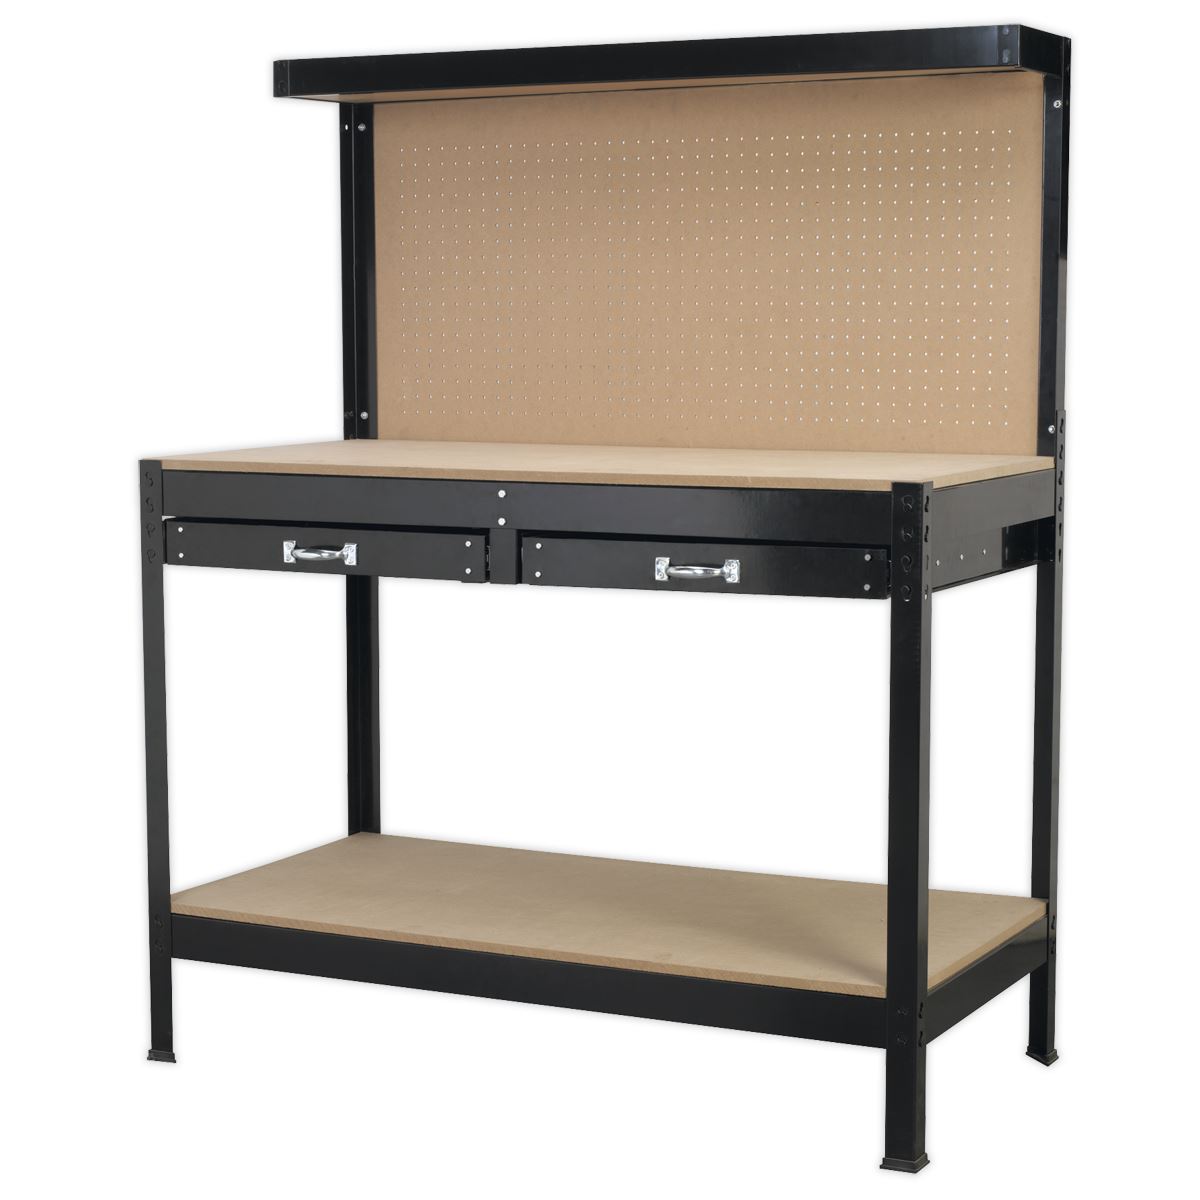 Sealey Workstation 1.2m with Drawers